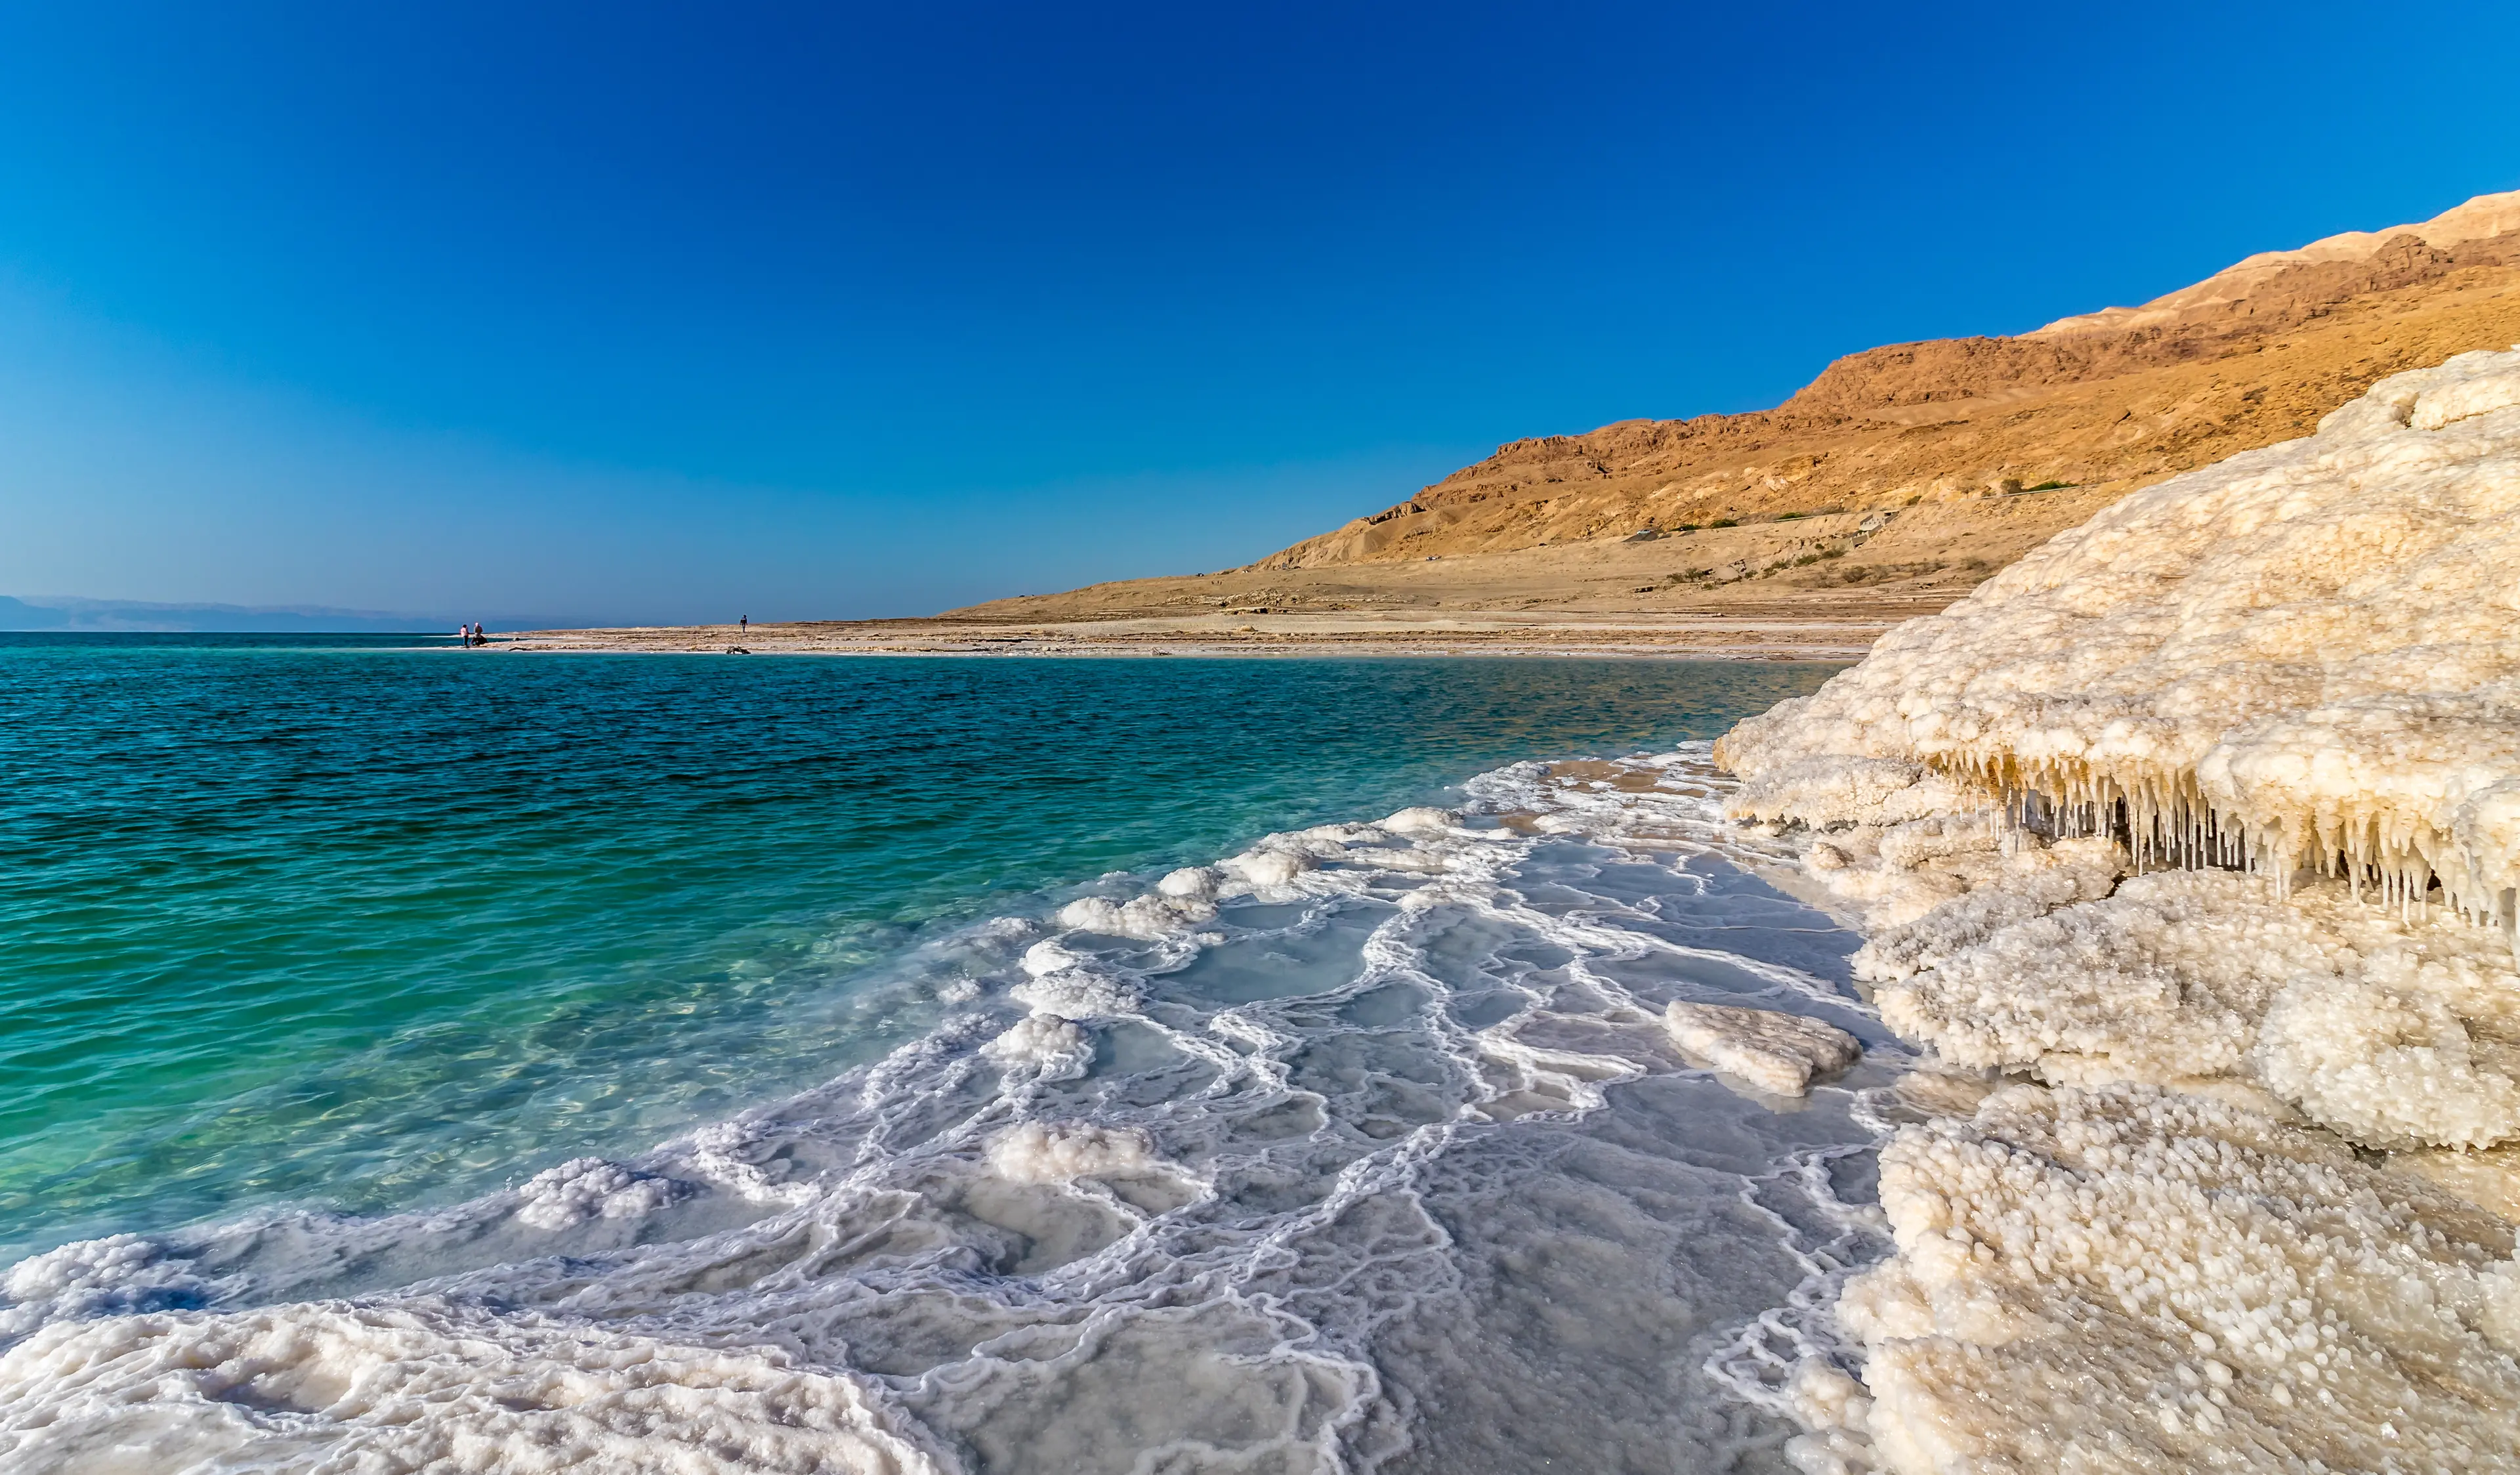 View of the Dead Sea from the Jordanian side